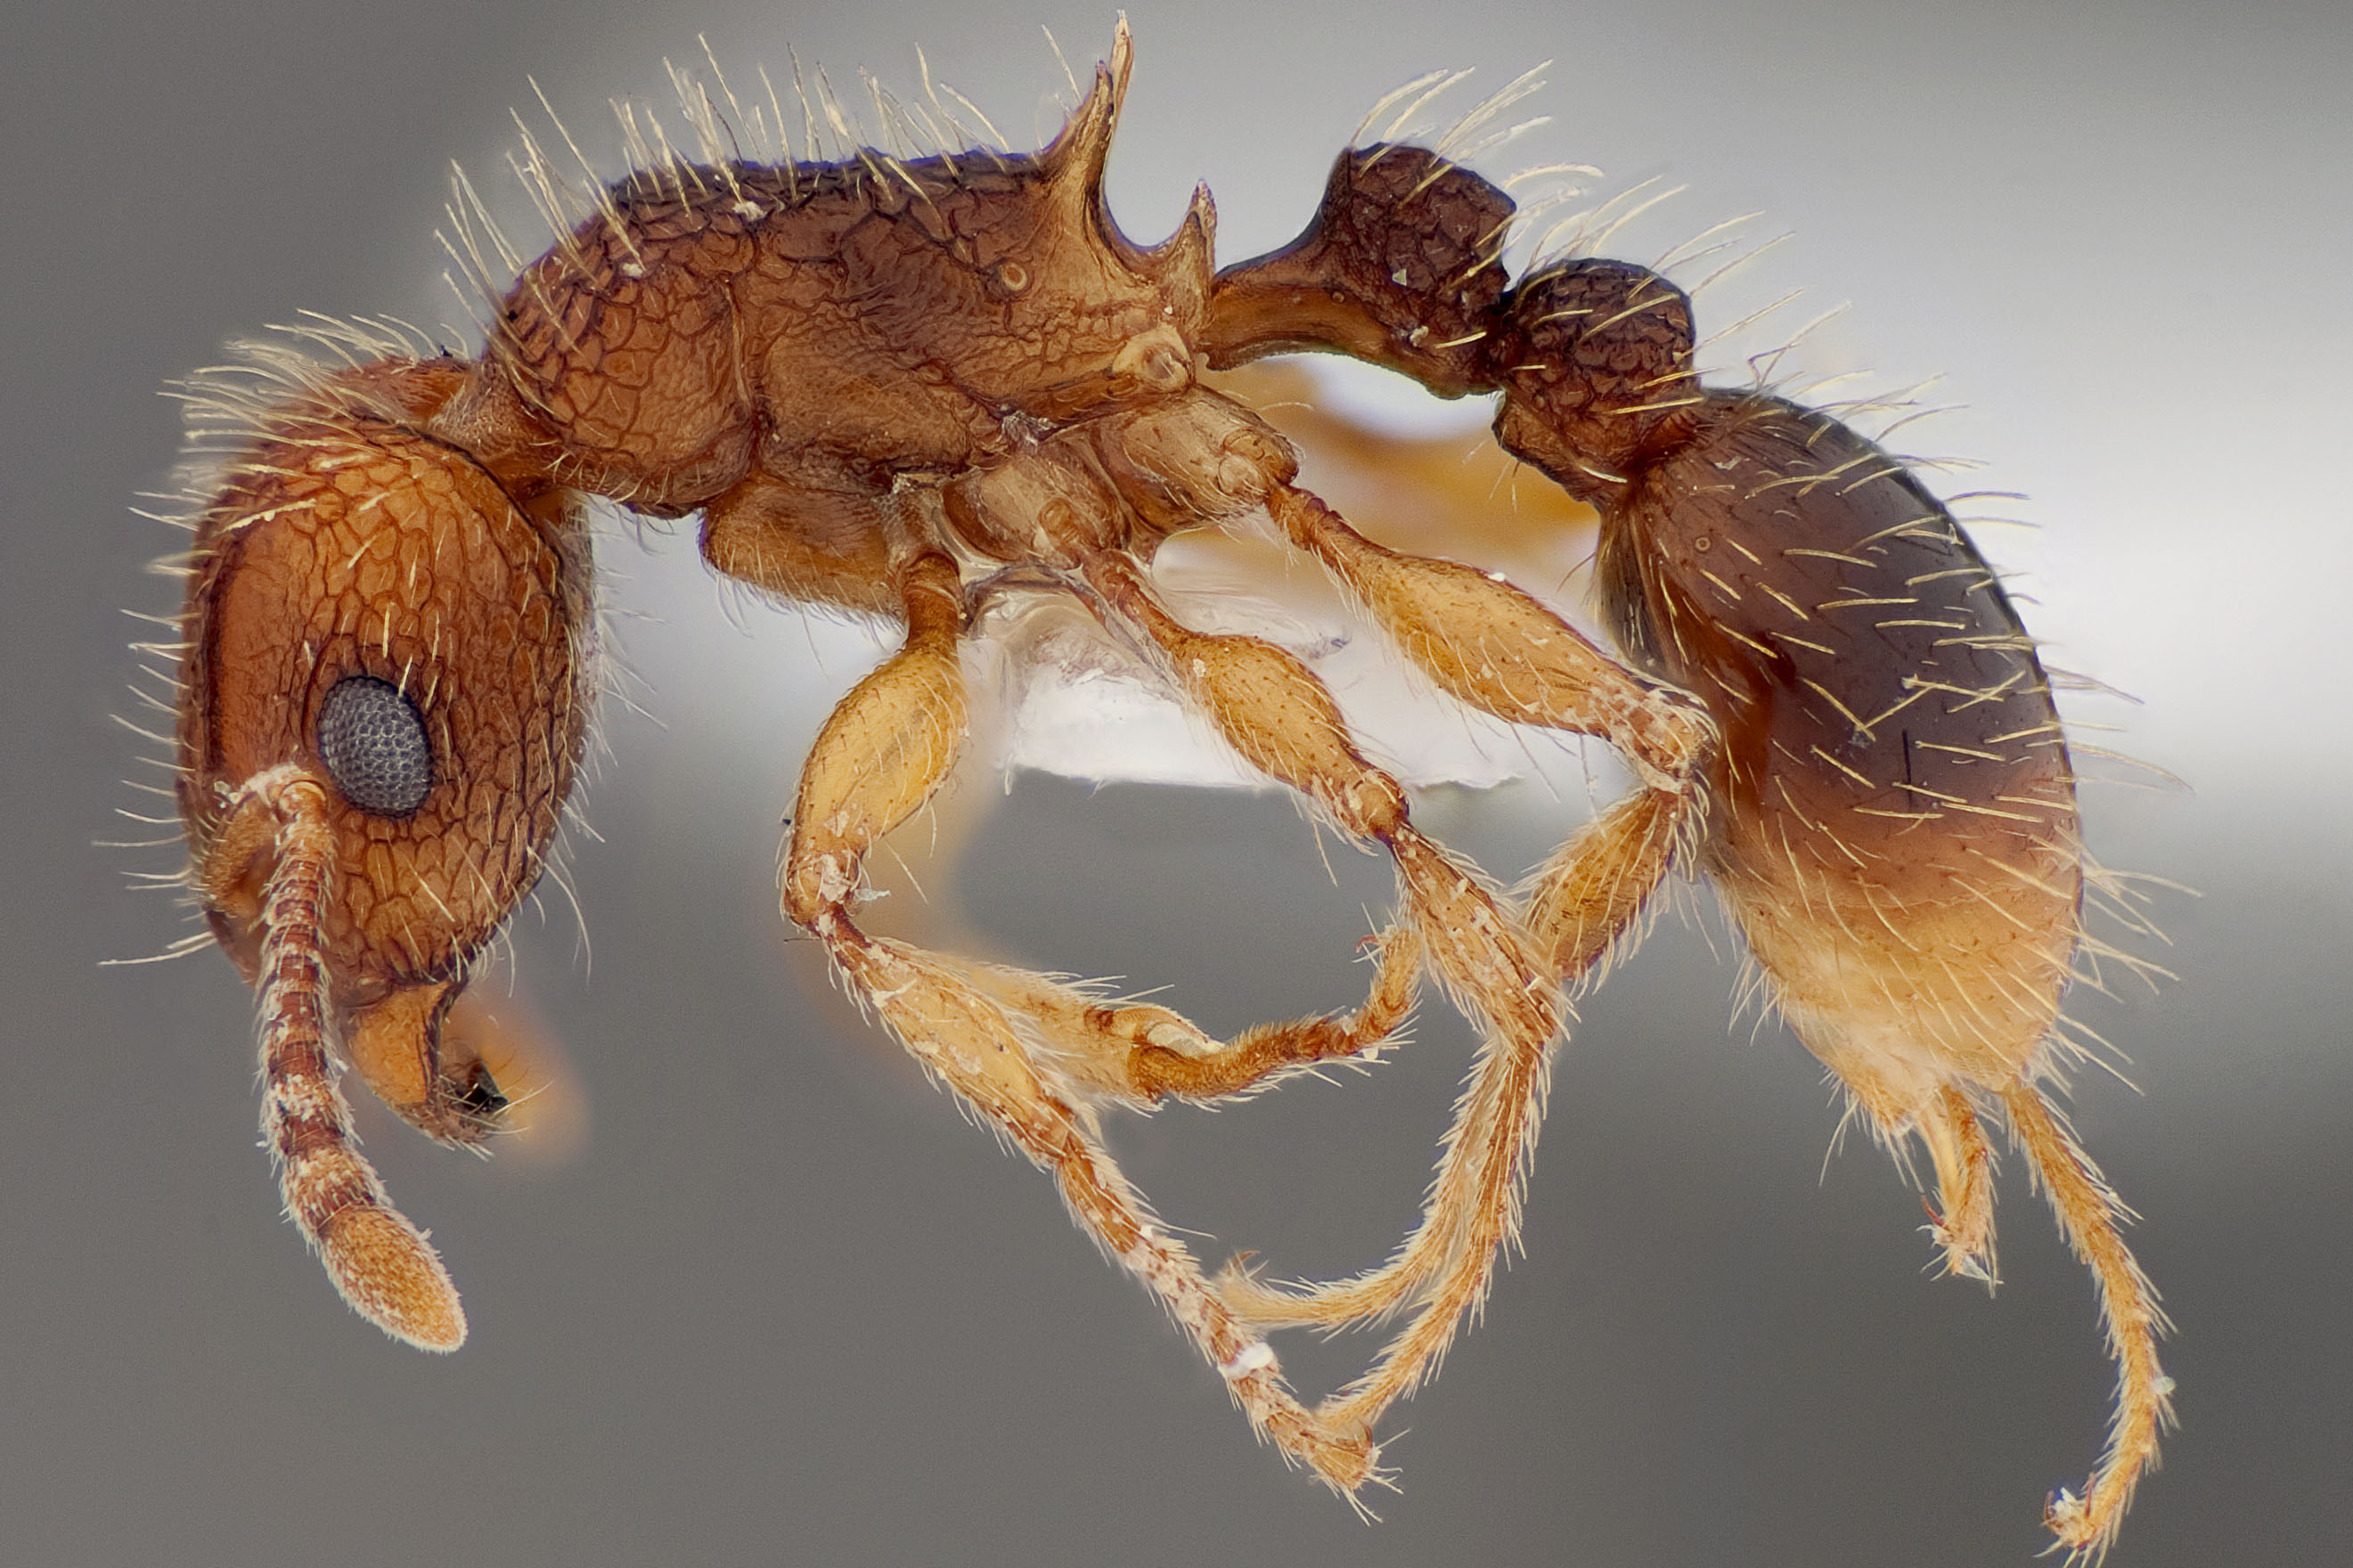 Close-up, high-resolution photograph of an ant specimen on a gray background. The ant is orange, yellow, and brown in color, with small yellow spikes or hairs all over its body.